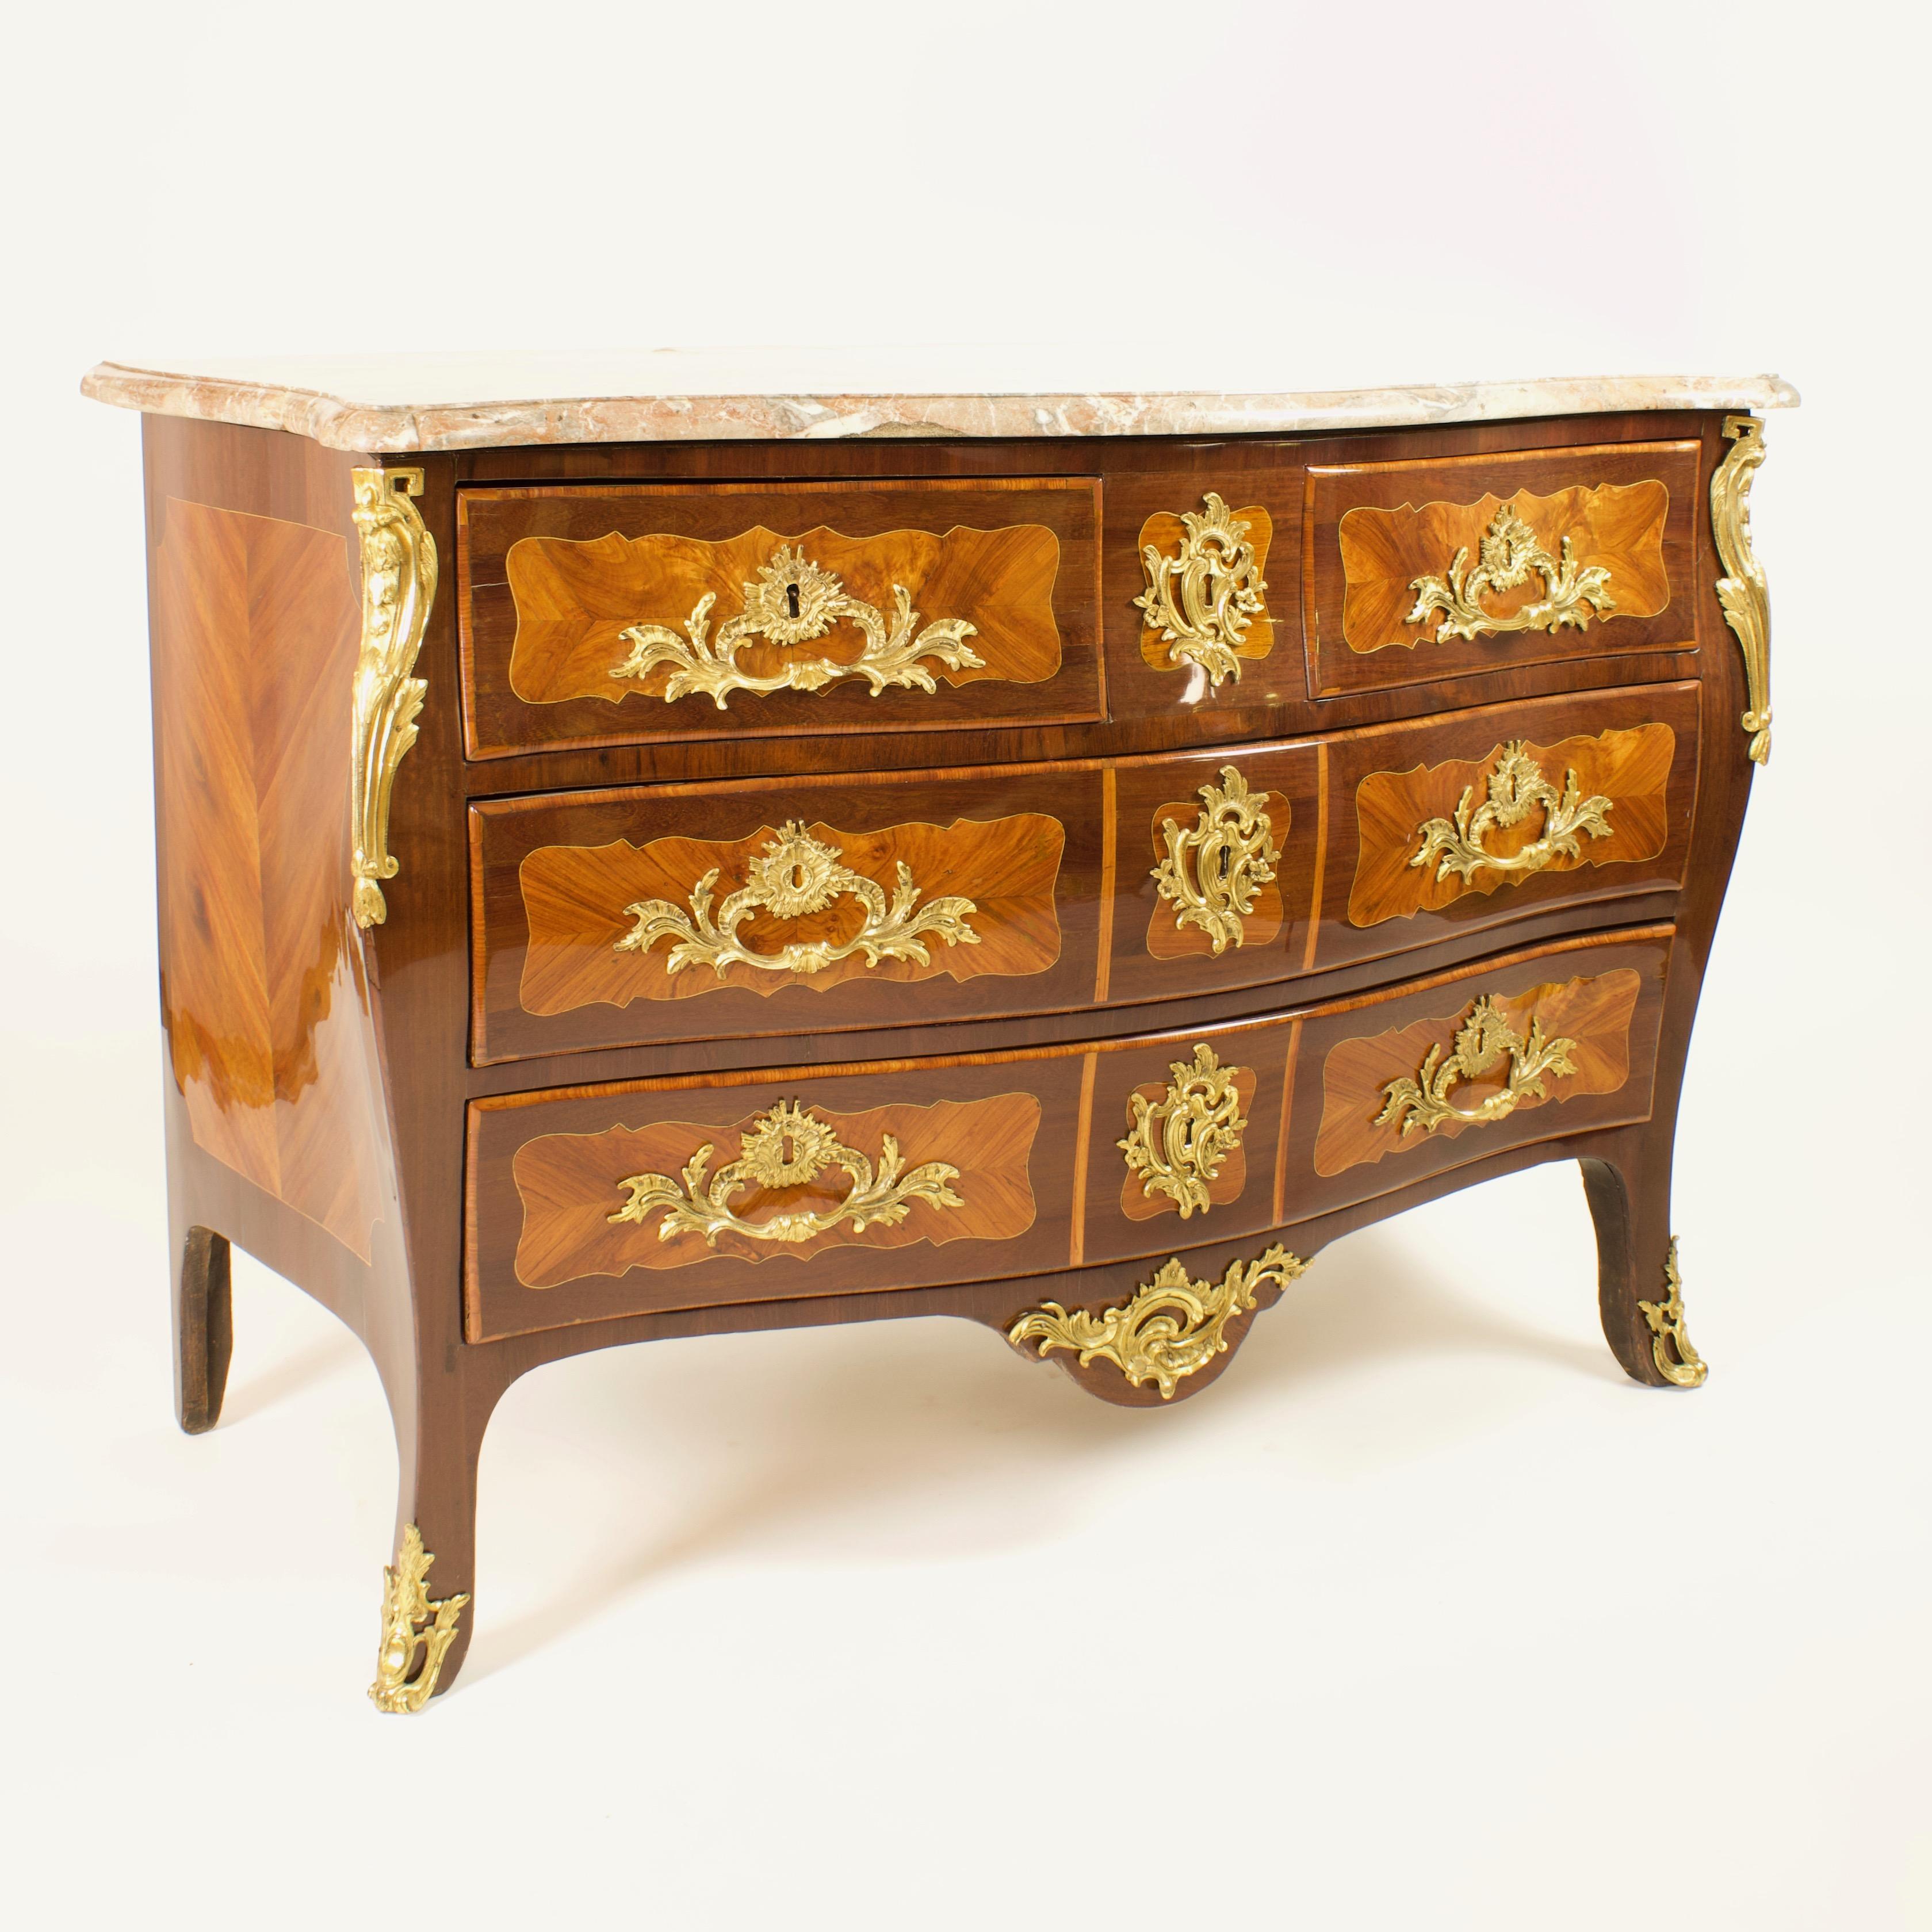 Important French Louis XV Marquetry Gilt-Bronze Commode 'En Tombeau', Stamped 